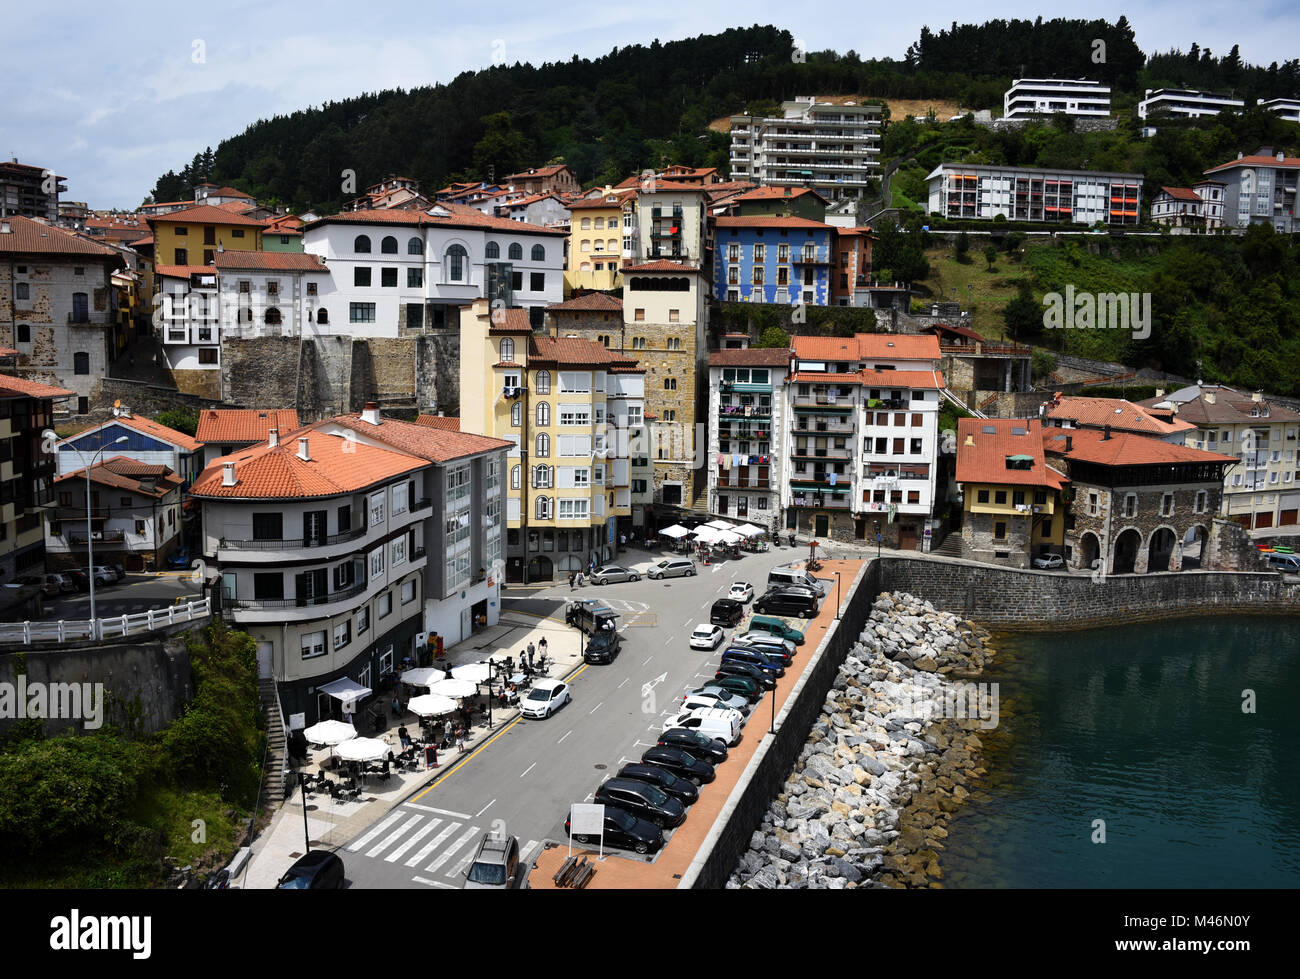 Mutriku harbour, Bay of Biscay, Basque country, Gipuzkoa province, Spain, Europe Stock Photo